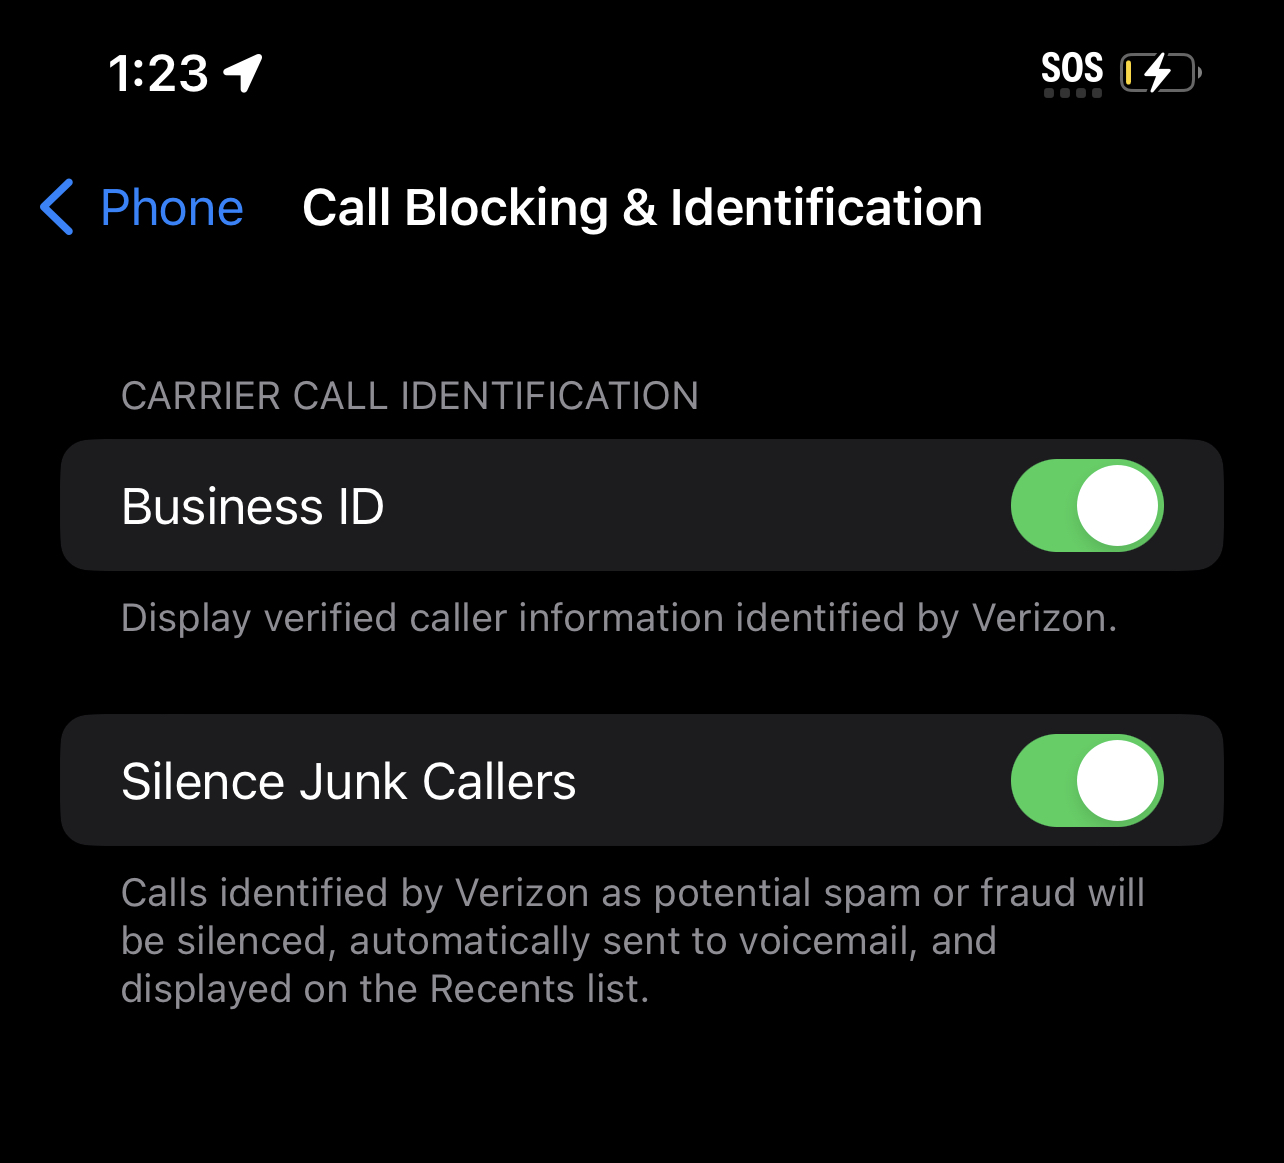 Verizon specific settings to silence junk callers